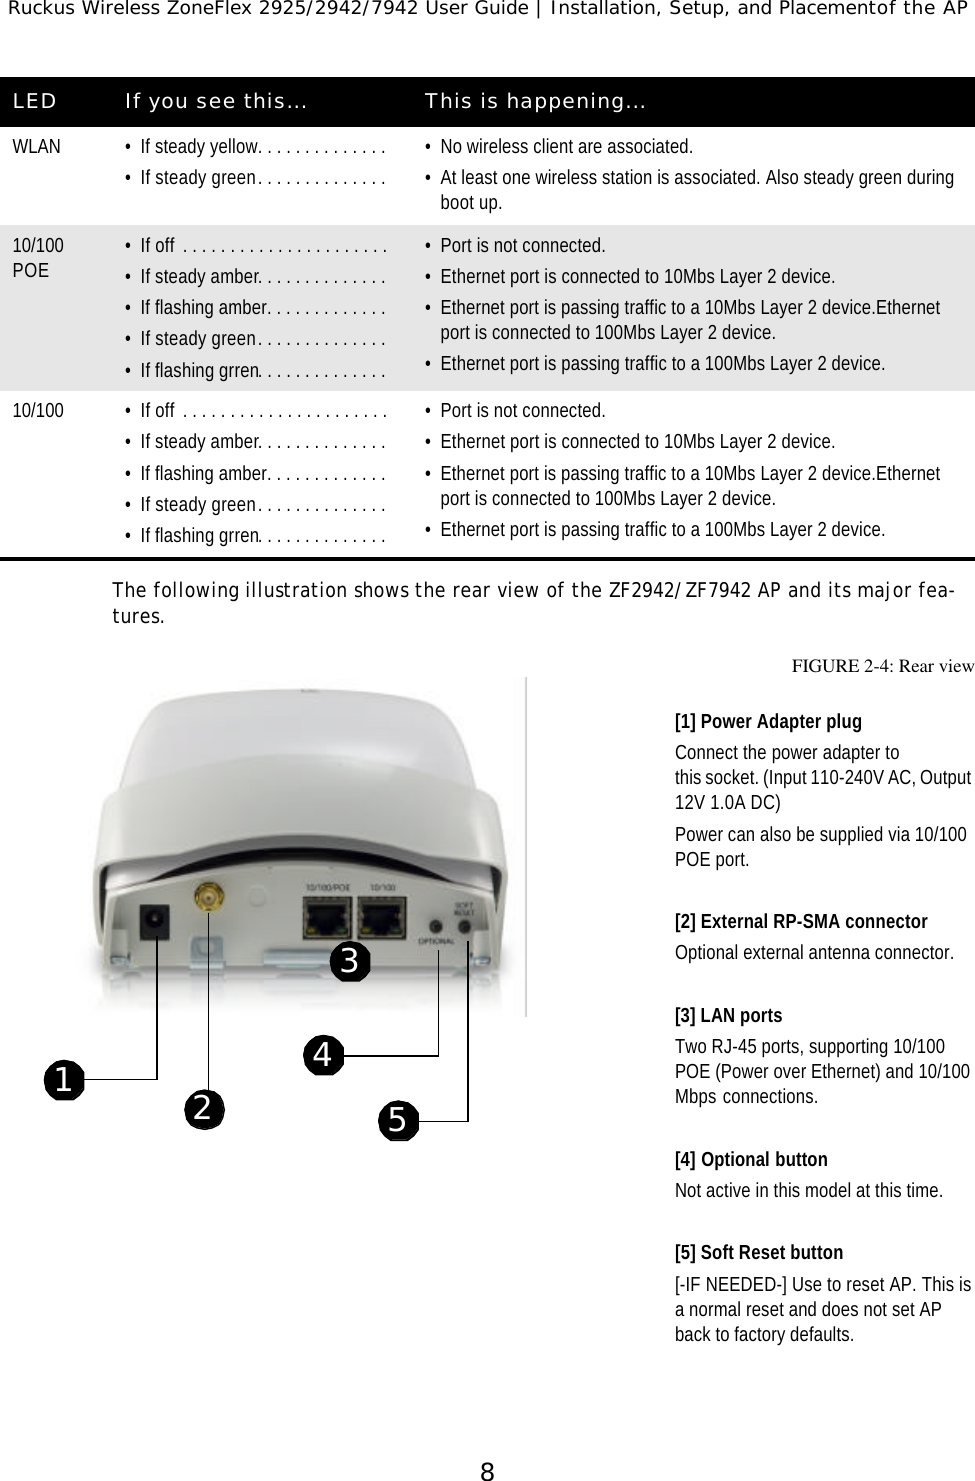 Ruckus Wireless ZoneFlex 2925/2942/7942 User Guide | Installation, Setup, and Placementof the AP8The following illustration shows the rear view of the ZF2942/ZF7942 AP and its major fea-tures. WLAN •If steady yellow. . . . . . . . . . . . . . •If steady green . . . . . . . . . . . . . . •No wireless client are associated.•At least one wireless station is associated. Also steady green during boot up.10/100 POE•If off  . . . . . . . . . . . . . . . . . . . . . . •If steady amber. . . . . . . . . . . . . . •If flashing amber. . . . . . . . . . . . . •If steady green . . . . . . . . . . . . . . •If flashing grren. . . . . . . . . . . . . . •Port is not connected.•Ethernet port is connected to 10Mbs Layer 2 device.•Ethernet port is passing traffic to a 10Mbs Layer 2 device.Ethernet port is connected to 100Mbs Layer 2 device.•Ethernet port is passing traffic to a 100Mbs Layer 2 device.10/100 •If off  . . . . . . . . . . . . . . . . . . . . . . •If steady amber. . . . . . . . . . . . . . •If flashing amber. . . . . . . . . . . . . •If steady green . . . . . . . . . . . . . . •If flashing grren. . . . . . . . . . . . . . •Port is not connected.•Ethernet port is connected to 10Mbs Layer 2 device.•Ethernet port is passing traffic to a 10Mbs Layer 2 device.Ethernet port is connected to 100Mbs Layer 2 device.•Ethernet port is passing traffic to a 100Mbs Layer 2 device.FIGURE 2-4: Rear view[1] Power Adapter plugConnect the power adapter to this socket. (Input 110-240V AC, Output 12V 1.0A DC)Power can also be supplied via 10/100 POE port.[2] External RP-SMA connectorOptional external antenna connector.[3] LAN portsTwo RJ-45 ports, supporting 10/100 POE (Power over Ethernet) and 10/100 Mbps connections.[4] Optional buttonNot active in this model at this time.[5] Soft Reset button[-IF NEEDED-] Use to reset AP. This is a normal reset and does not set AP back to factory defaults.LED If you see this... This is happening...13452